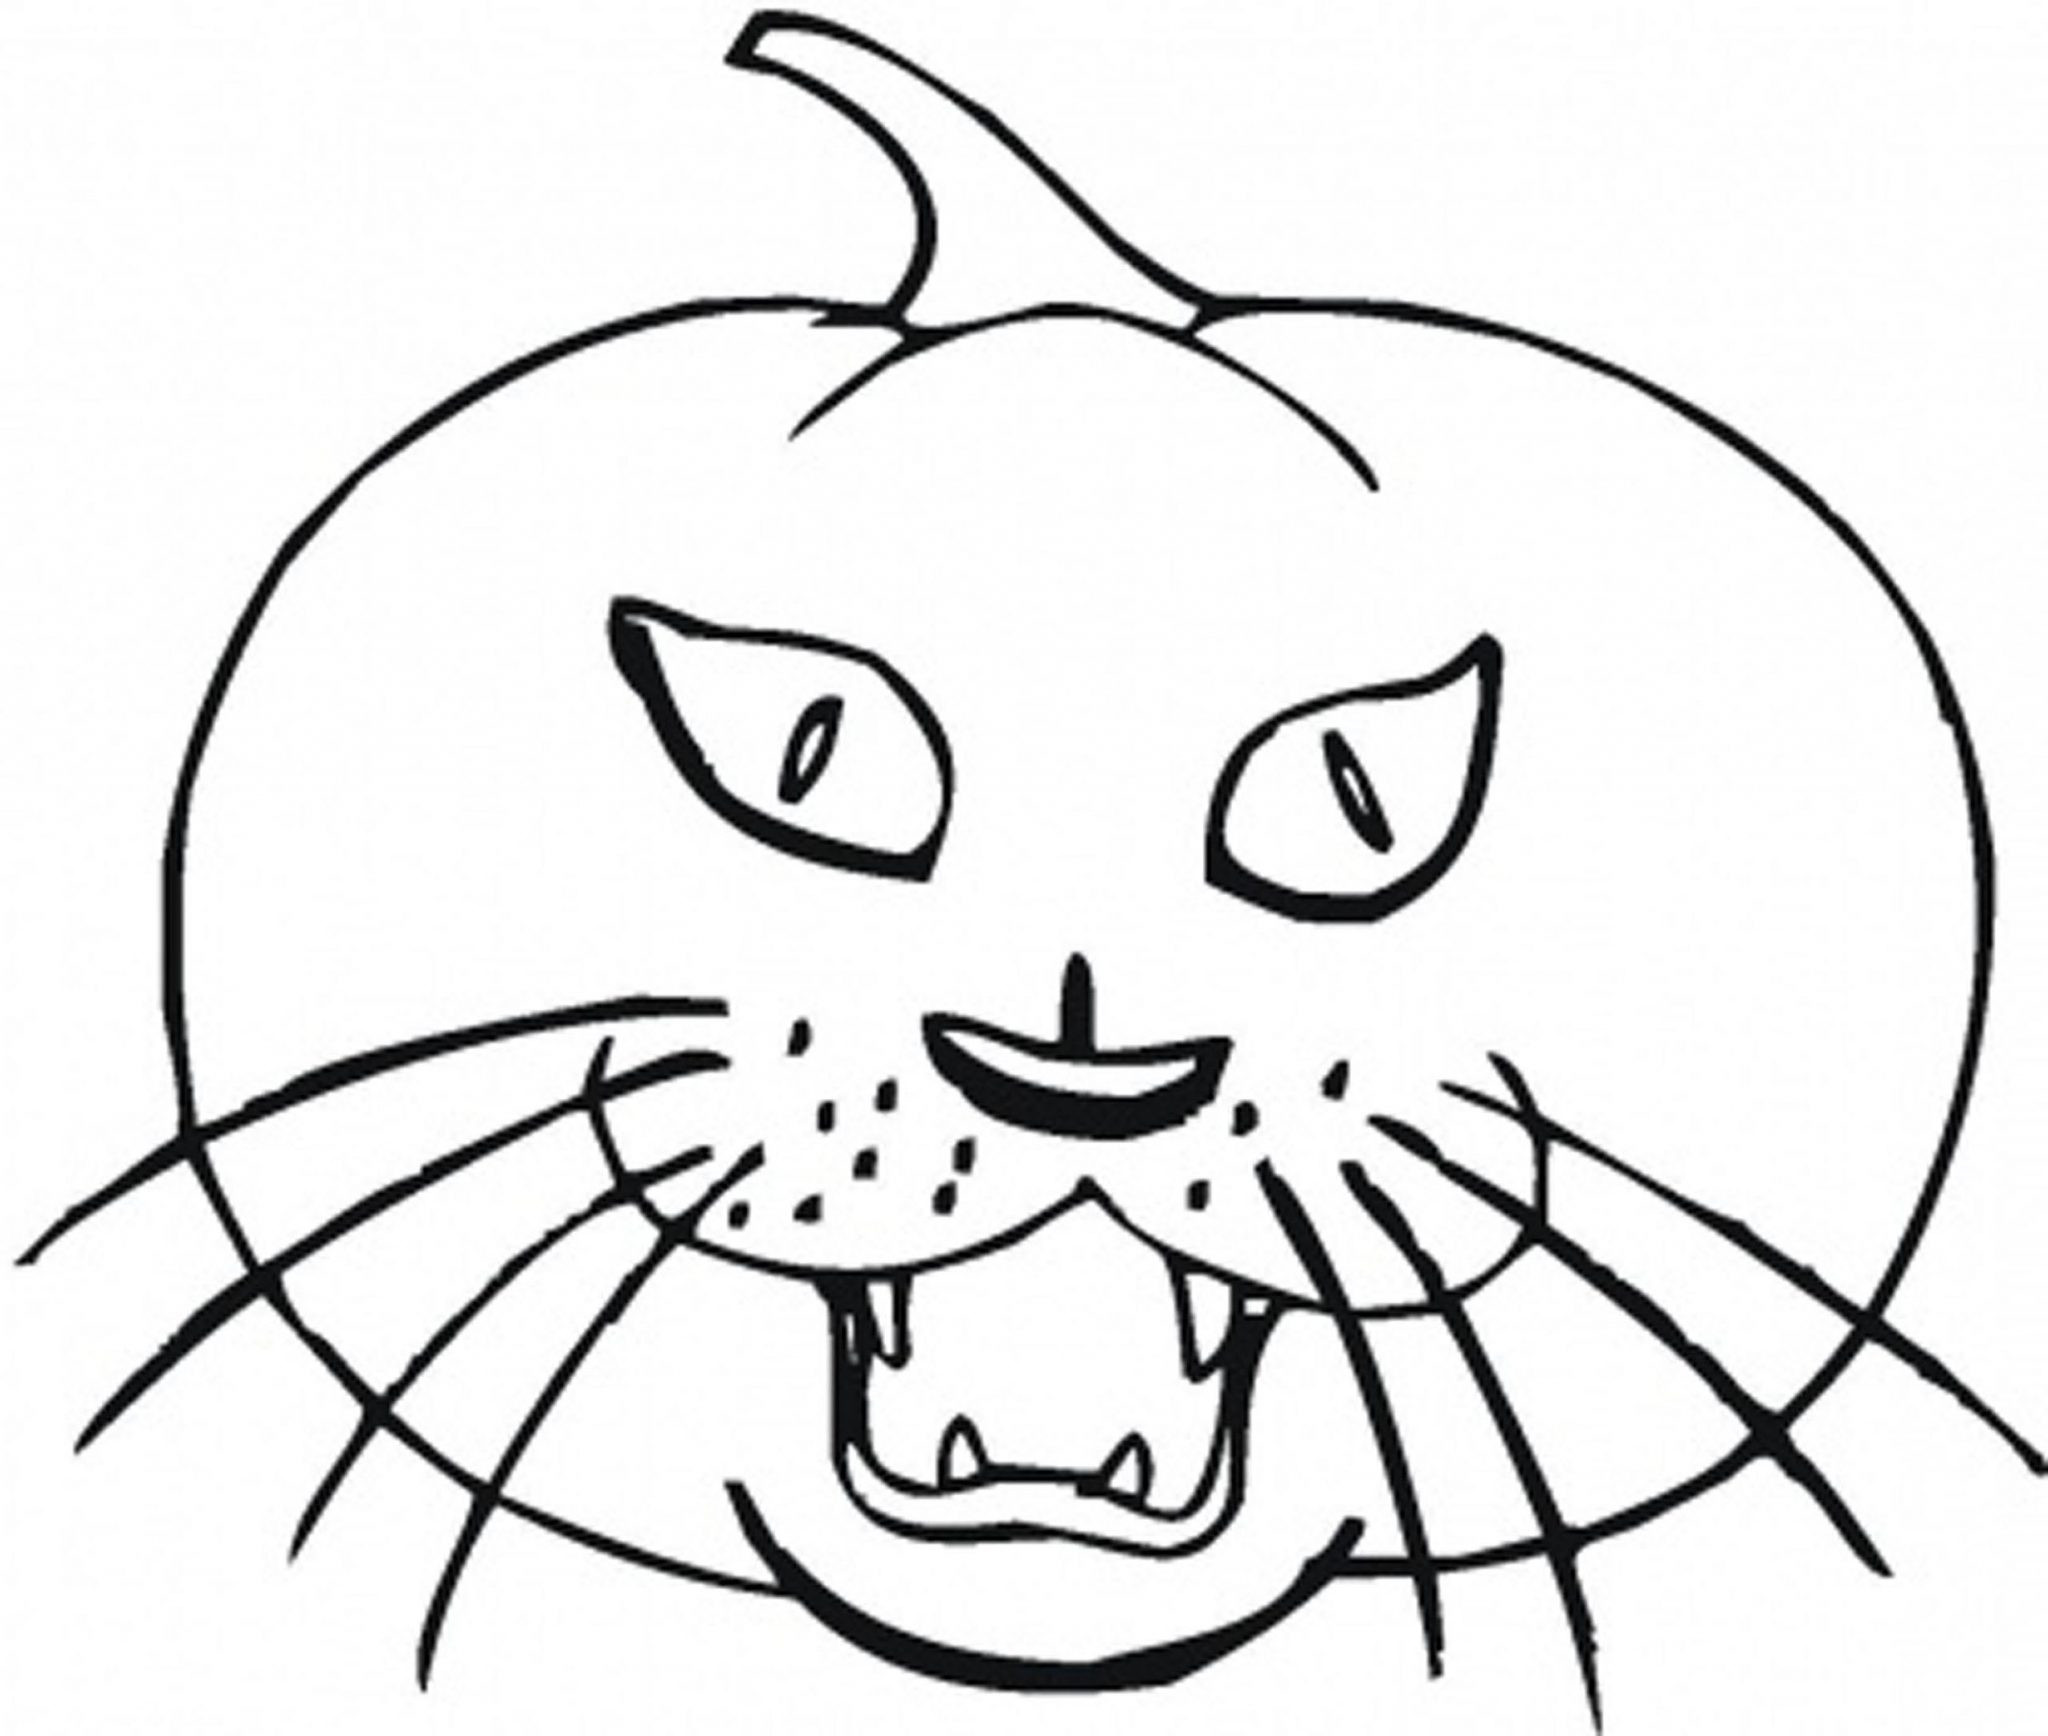 Printable Halloween Coloring Pages
 Print & Download Pumpkin Coloring Pages and Benefits of